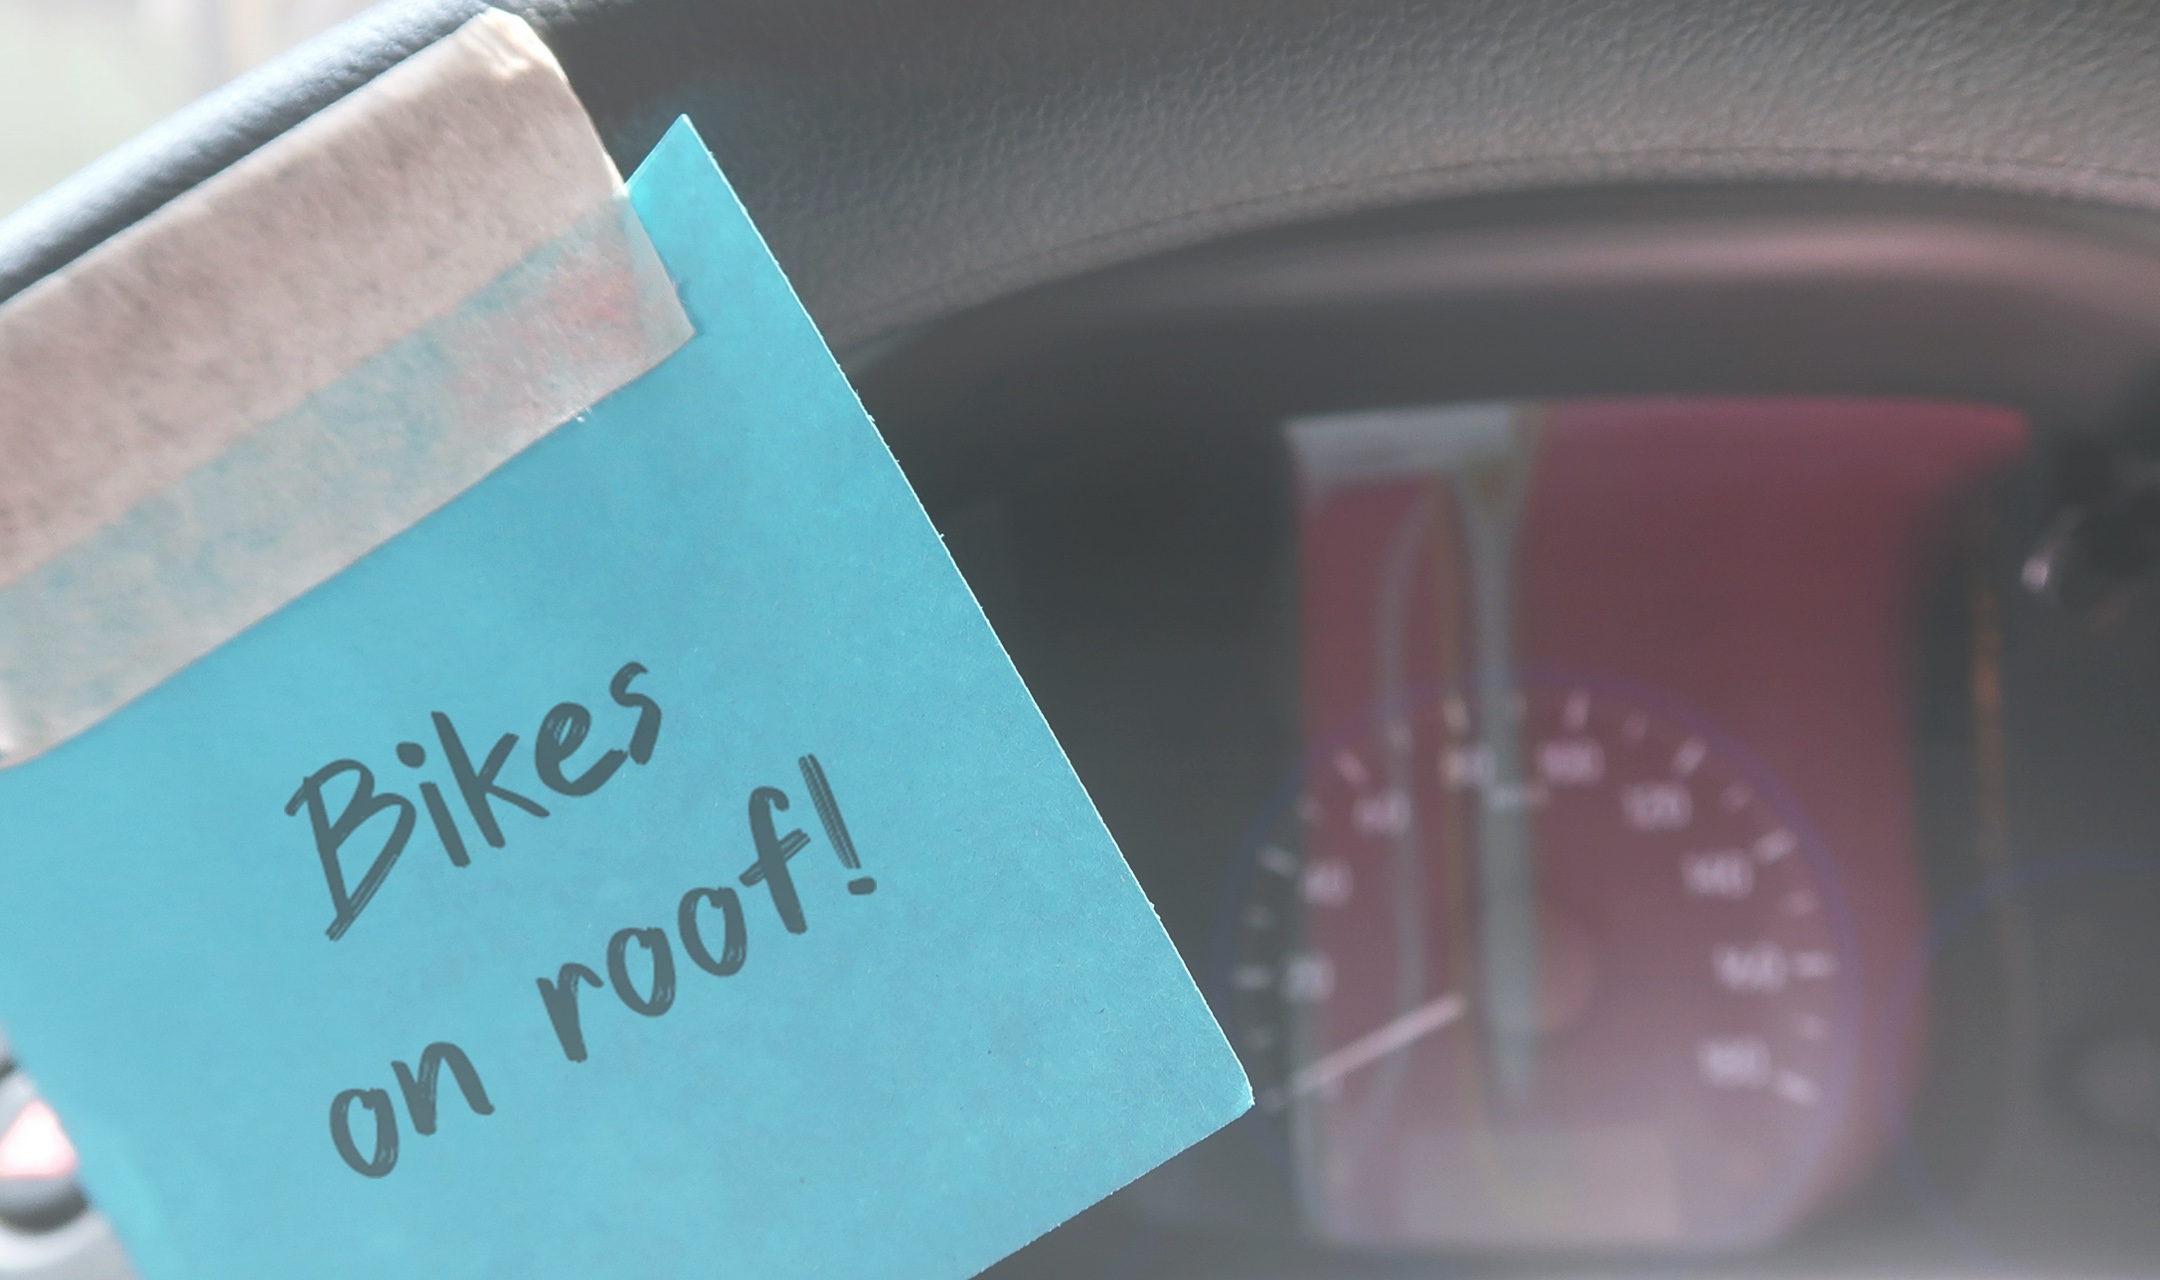 We've also tried a sticky note on the steering wheel!